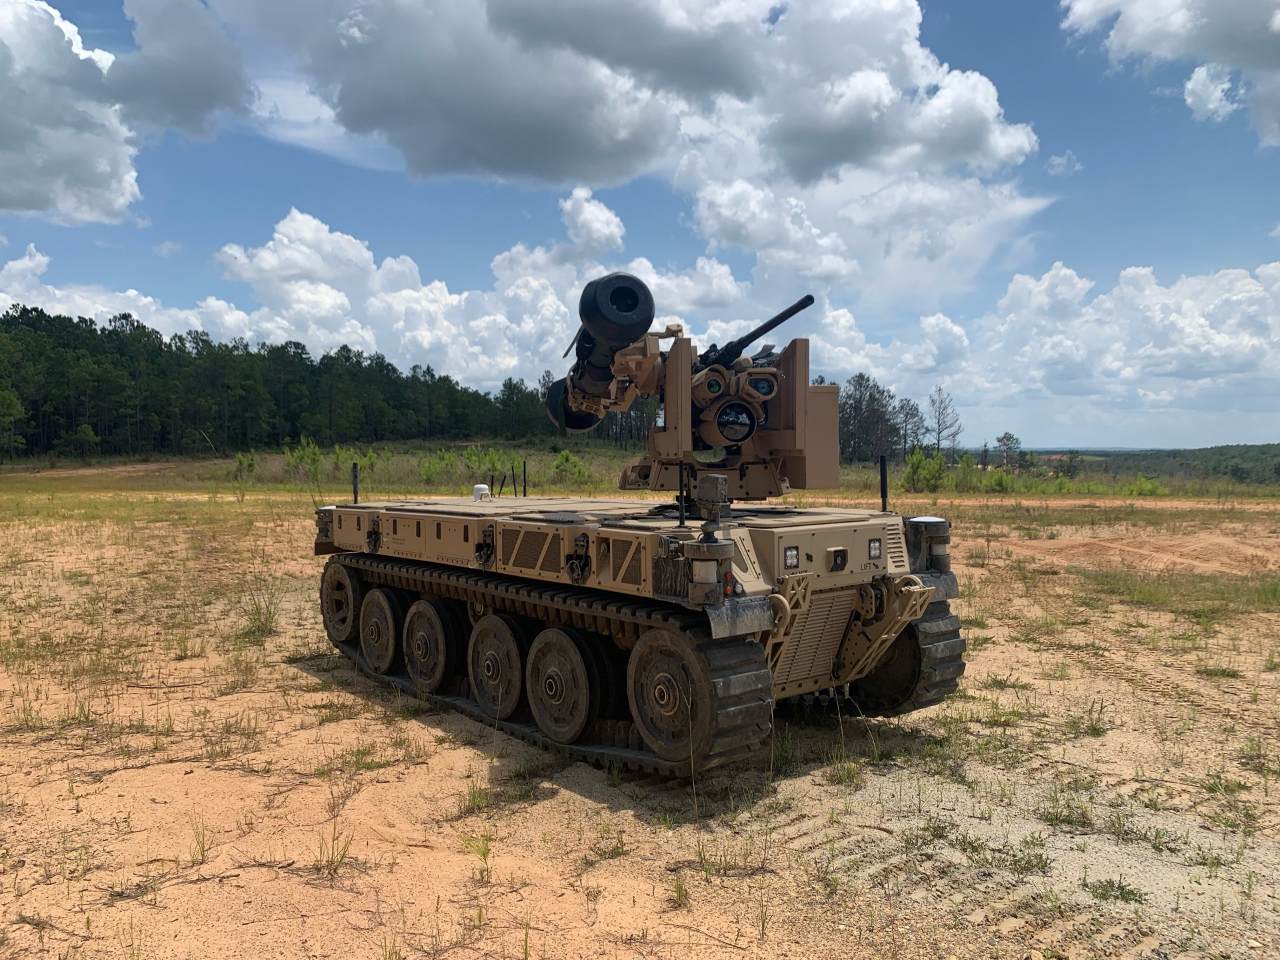 Javelin demonstration from a Robotic Combat Vehicle (RCV) prototype in May 2021 at Redstone Arsenal in Huntsville, AL (Photo courtesy of the U.S. Army)